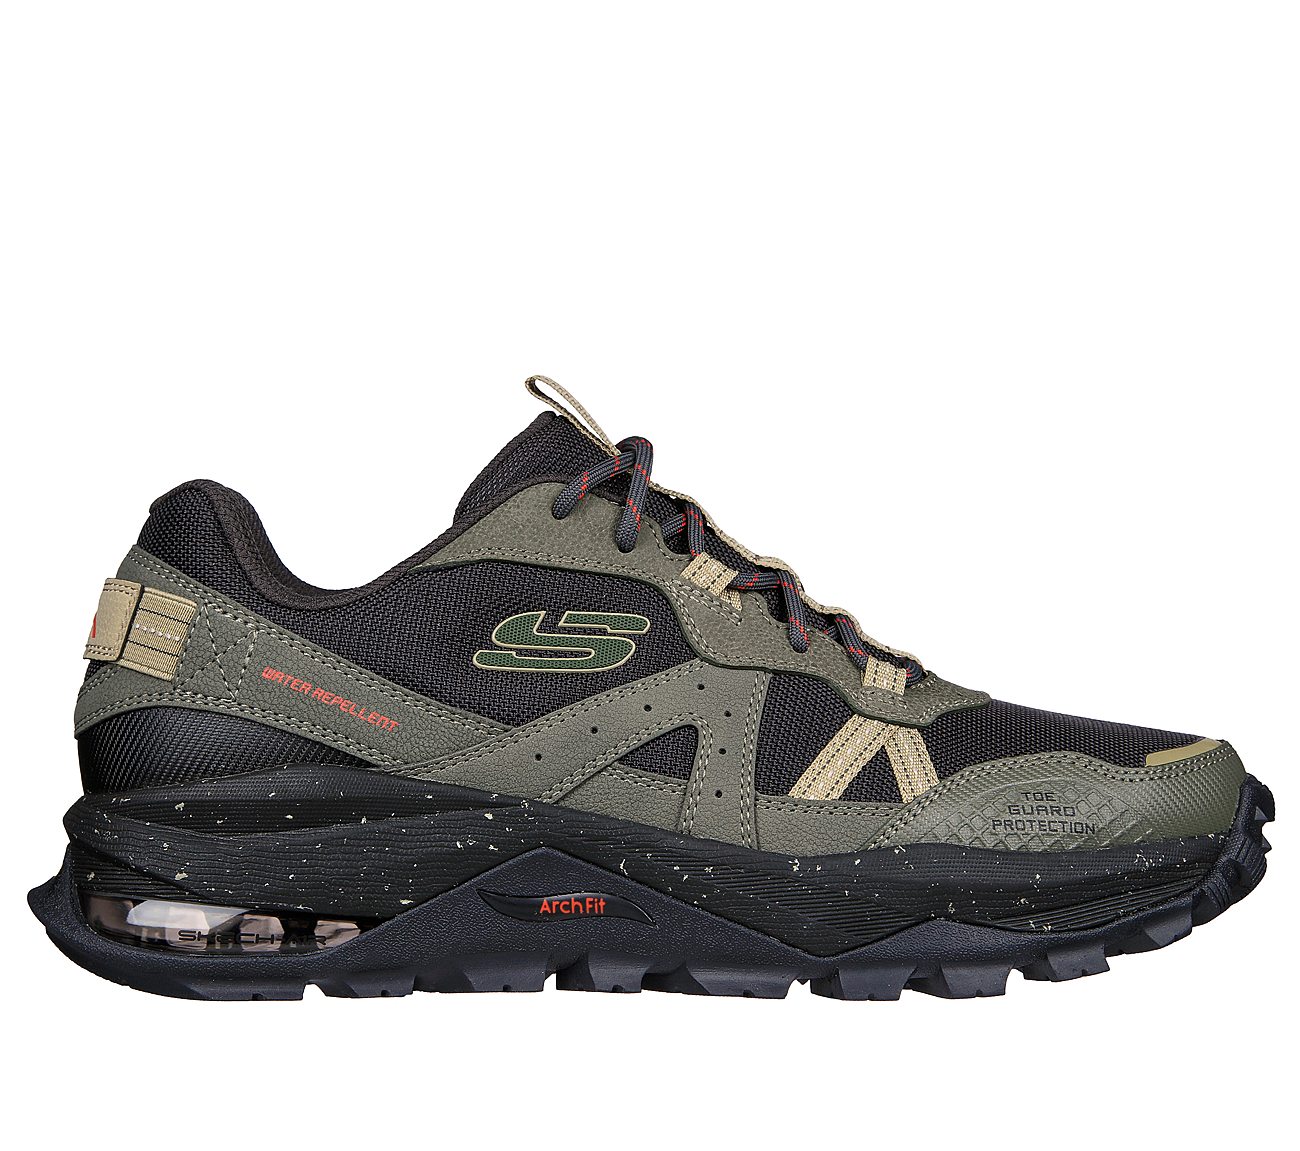 ARCH FIT TRAIL AIR, OLIVE/BLACK Footwear Lateral View